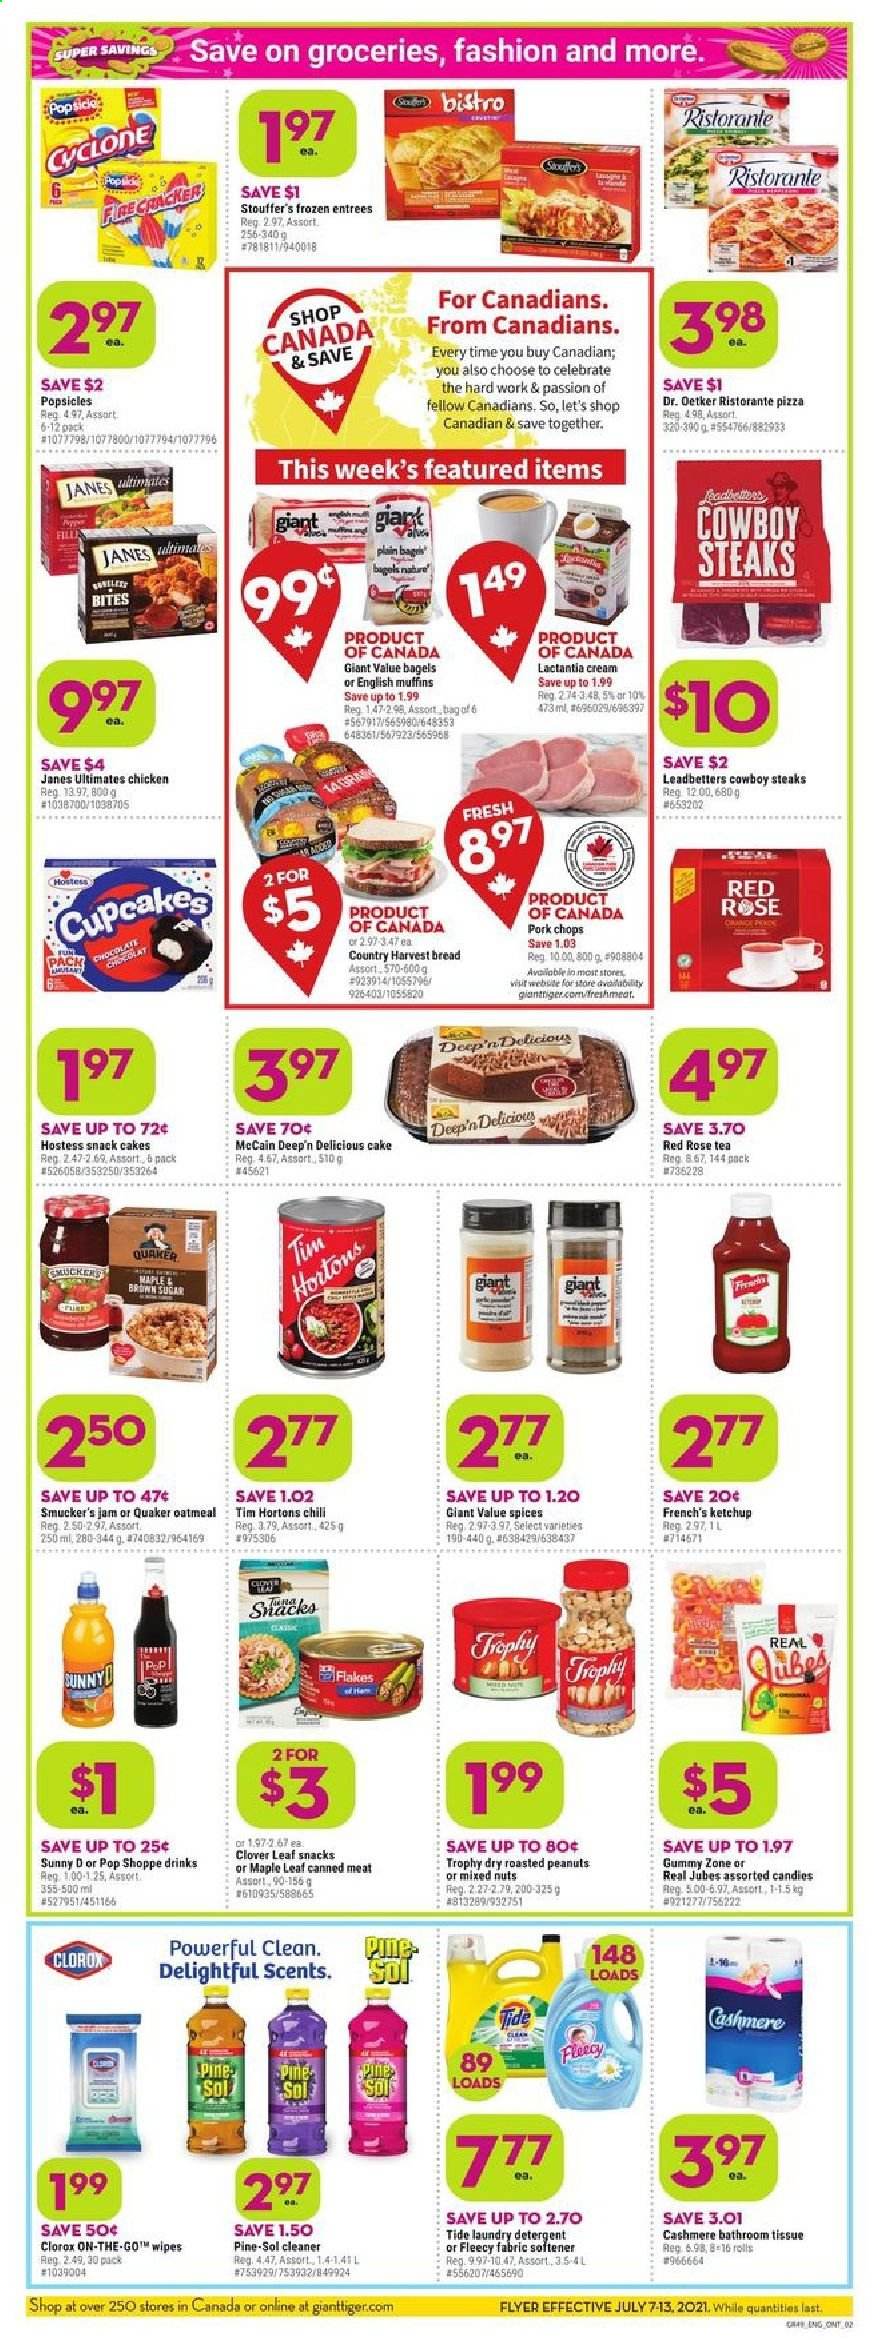 thumbnail - Giant Tiger Flyer - July 07, 2021 - July 13, 2021 - Sales products - bagels, bread, english muffins, cake, cupcake, pizza, Quaker, ham, Dr. Oetker, Clover, Country Harvest, Stouffer's, snack, fruit jam, roasted peanuts, peanuts, mixed nuts, tea, wine, rosé wine, pork chops, pork meat, wipes, bath tissue, cleaner, Clorox, Pine-Sol, Tide, fabric softener, laundry detergent, trophy cup, rose, steak. Page 2.